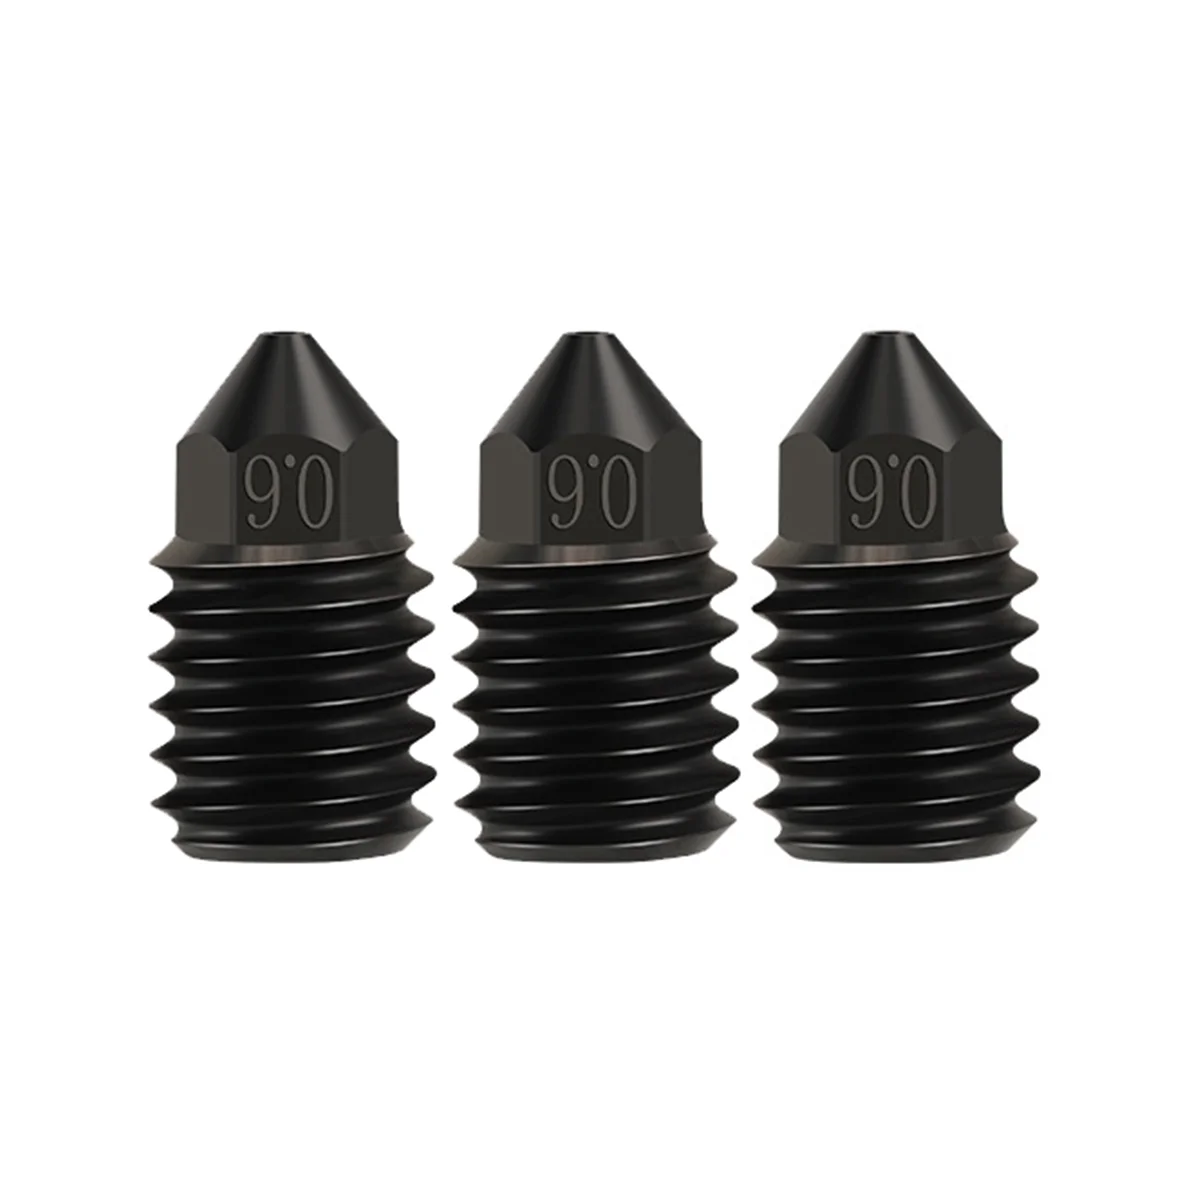 

3Pcs Clone Cht Nozzle 0.6mm Cht Hardened Steel High Flow Extruder Nozzles for Upgraded Bambulab Hotend P1P X1C